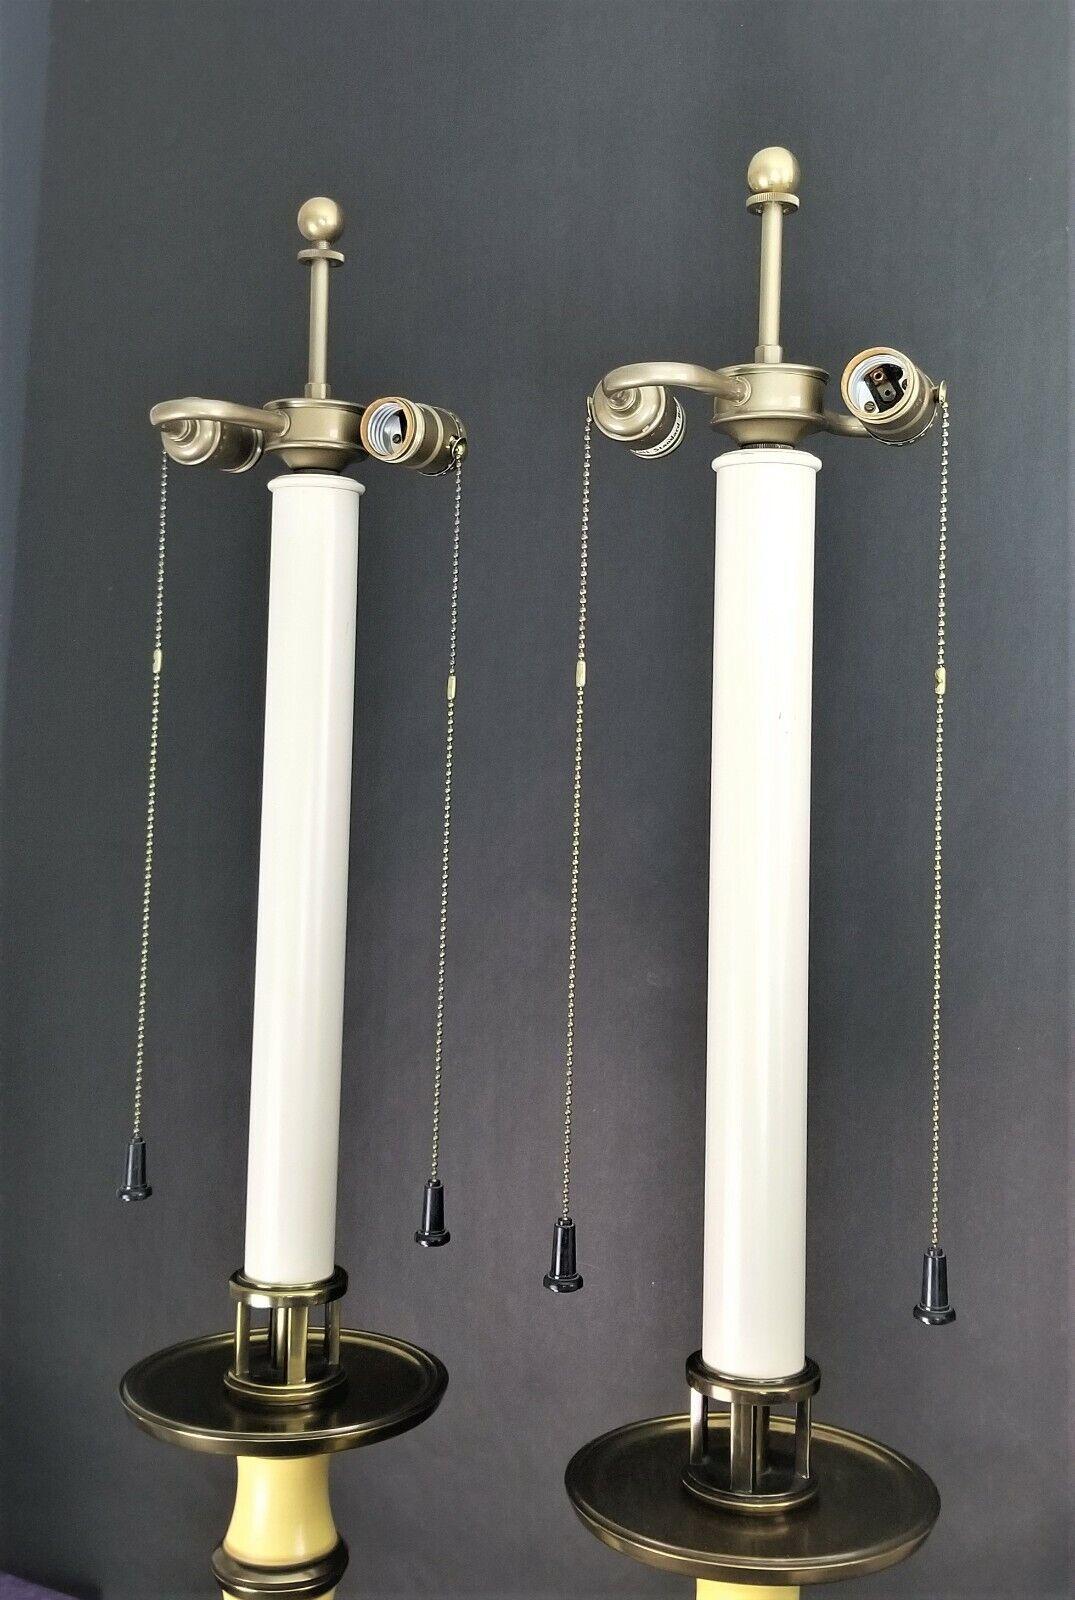 Stiffel Enamel Brass Candlestick Lamps with Dupioni Silk Shades For Sale 2